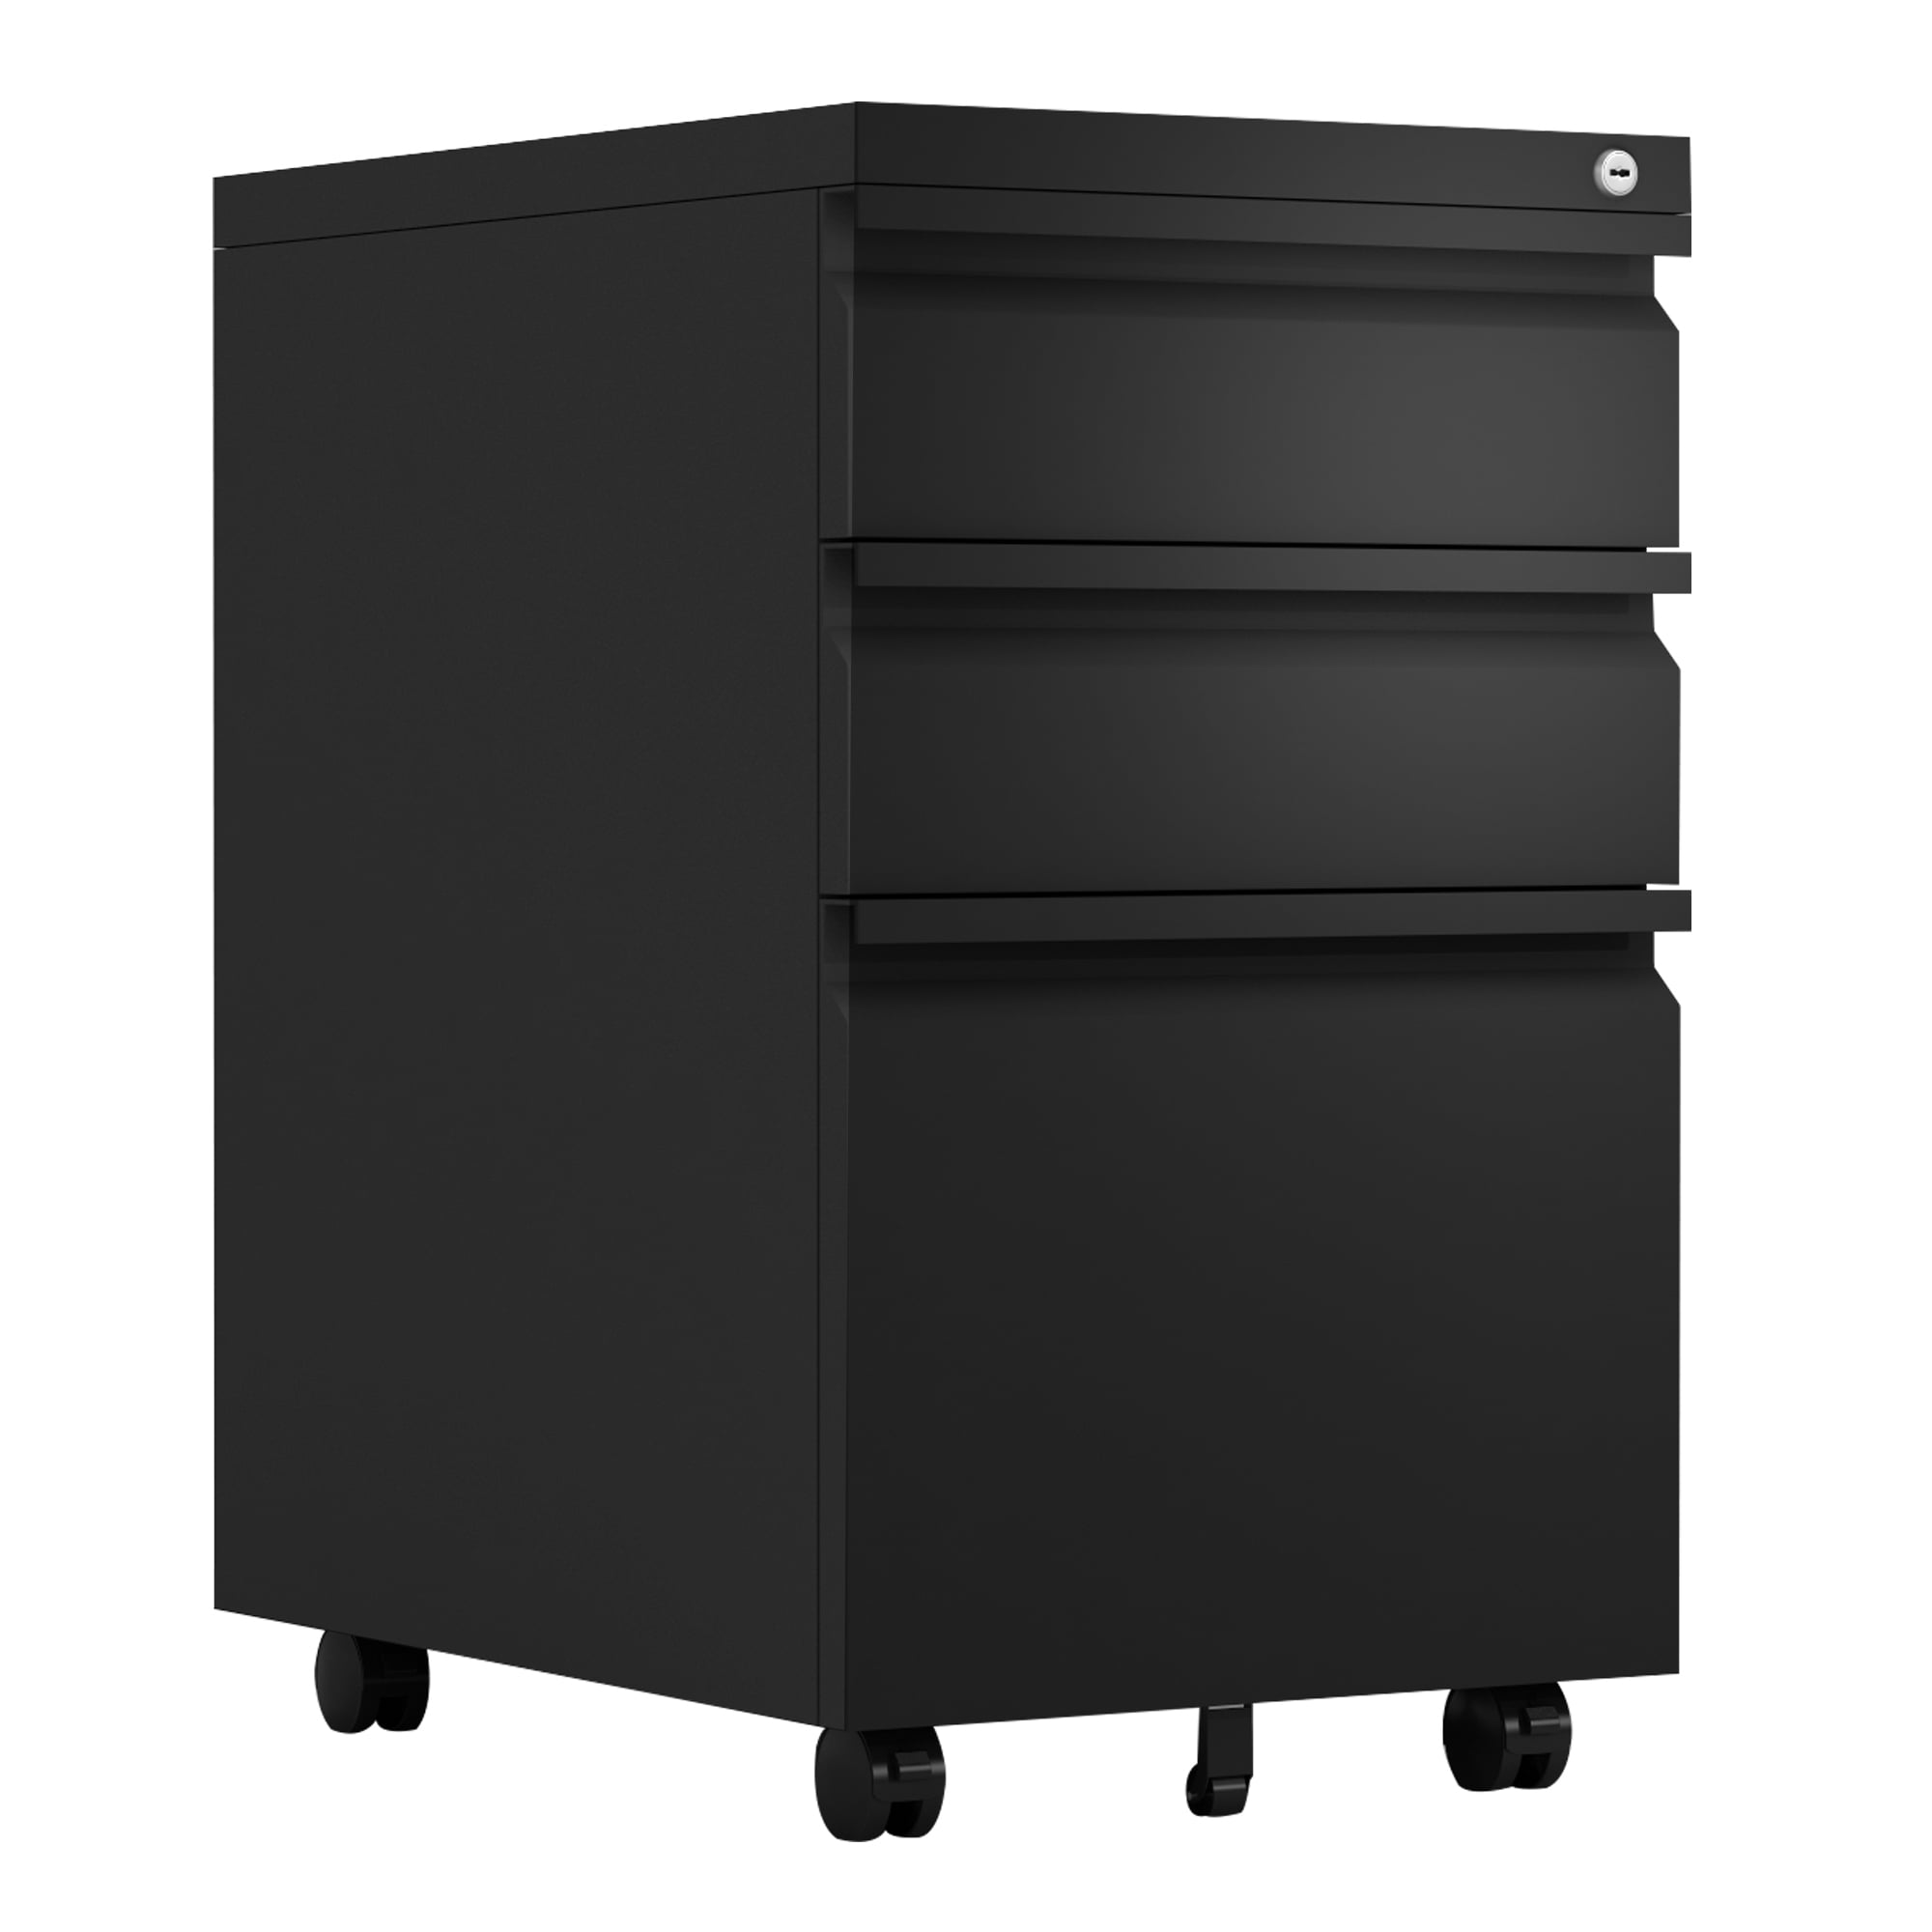 Black Fully Assembled Except Wheels File Cabinet 3 Drawer Metal File Cabinet with Lock and 5 Casters Mobile Filing Cabinet Office Cabinet Under Desk Cabinet with Storage for Hanging File Letters 